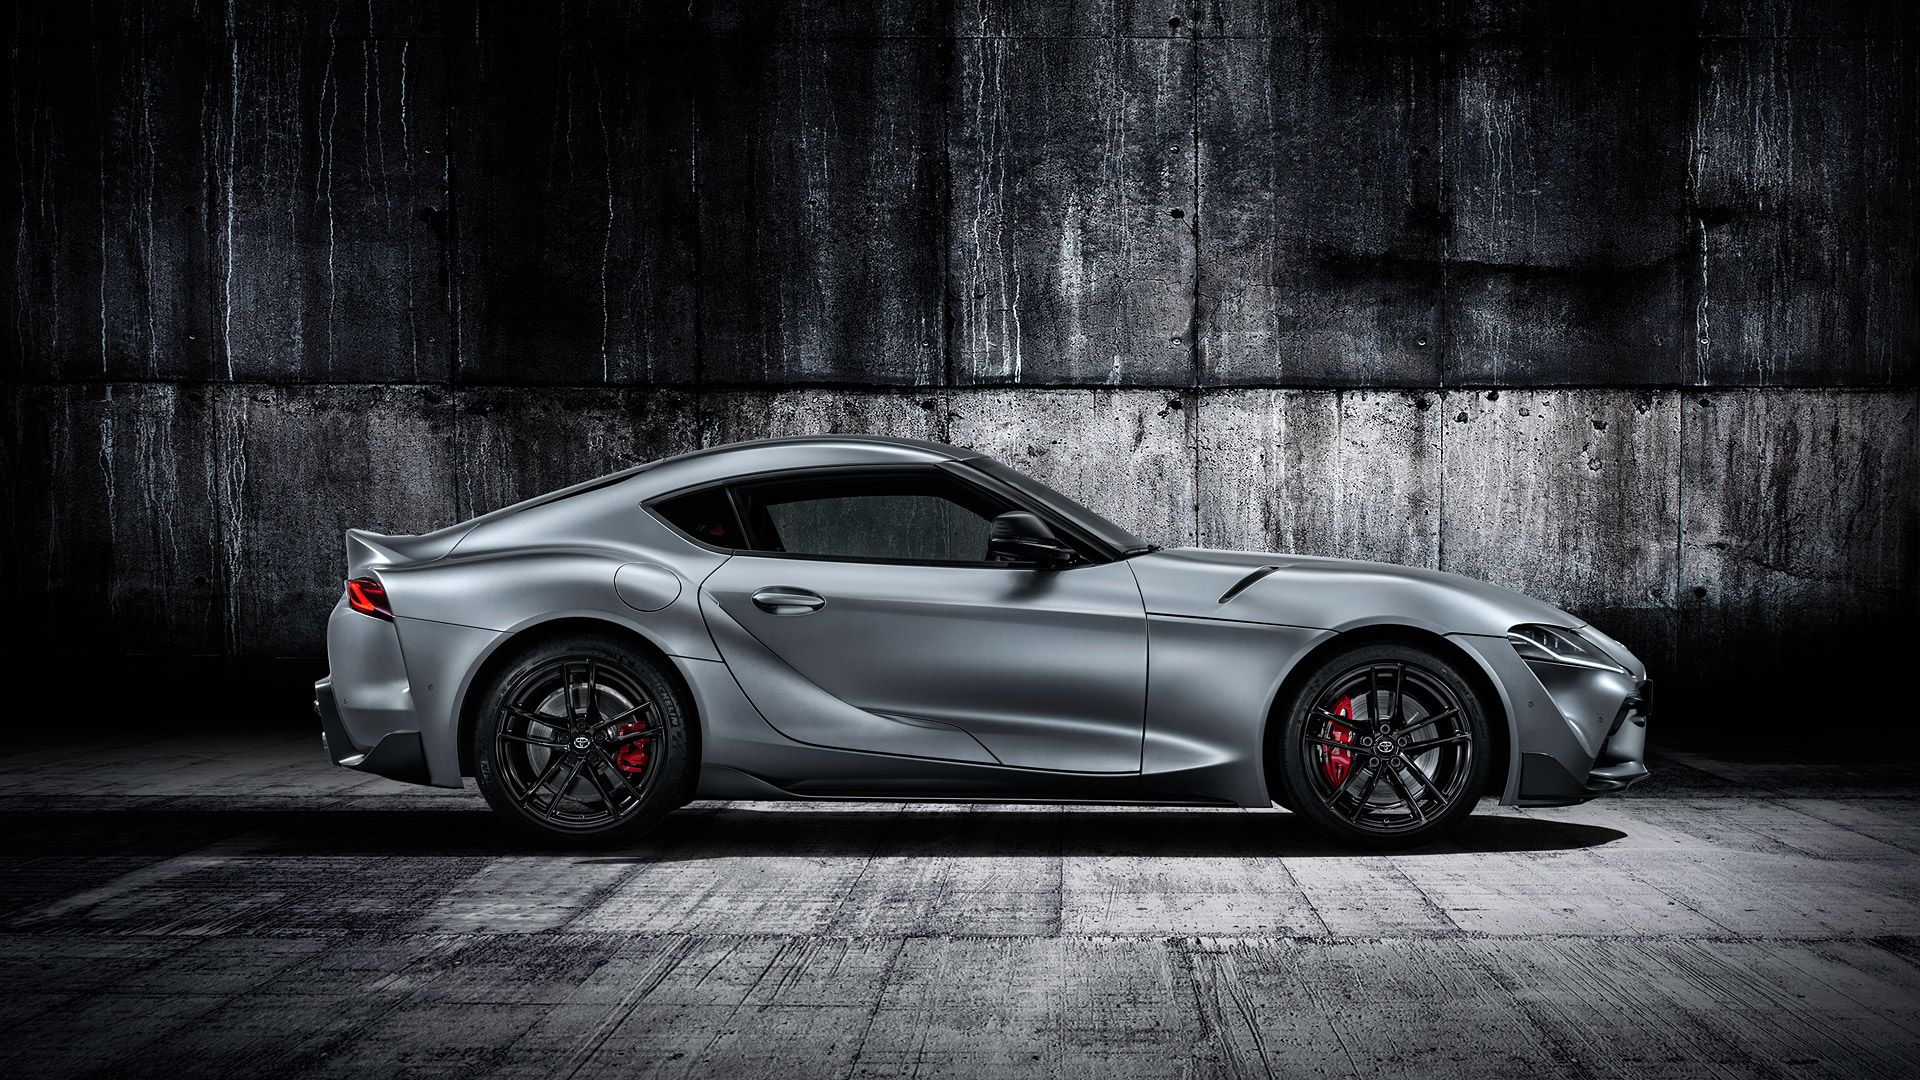 Free download 2020 Toyota Supra Wallpaper HD Image WSupercars [1920x1080] for your Desktop, Mobile & Tablet. Explore Toyota Supra 2020 Wallpaper. Toyota Supra 2020 Wallpaper, Toyota Supra Wallpaper, 2017 Toyota Supra Wallpaper